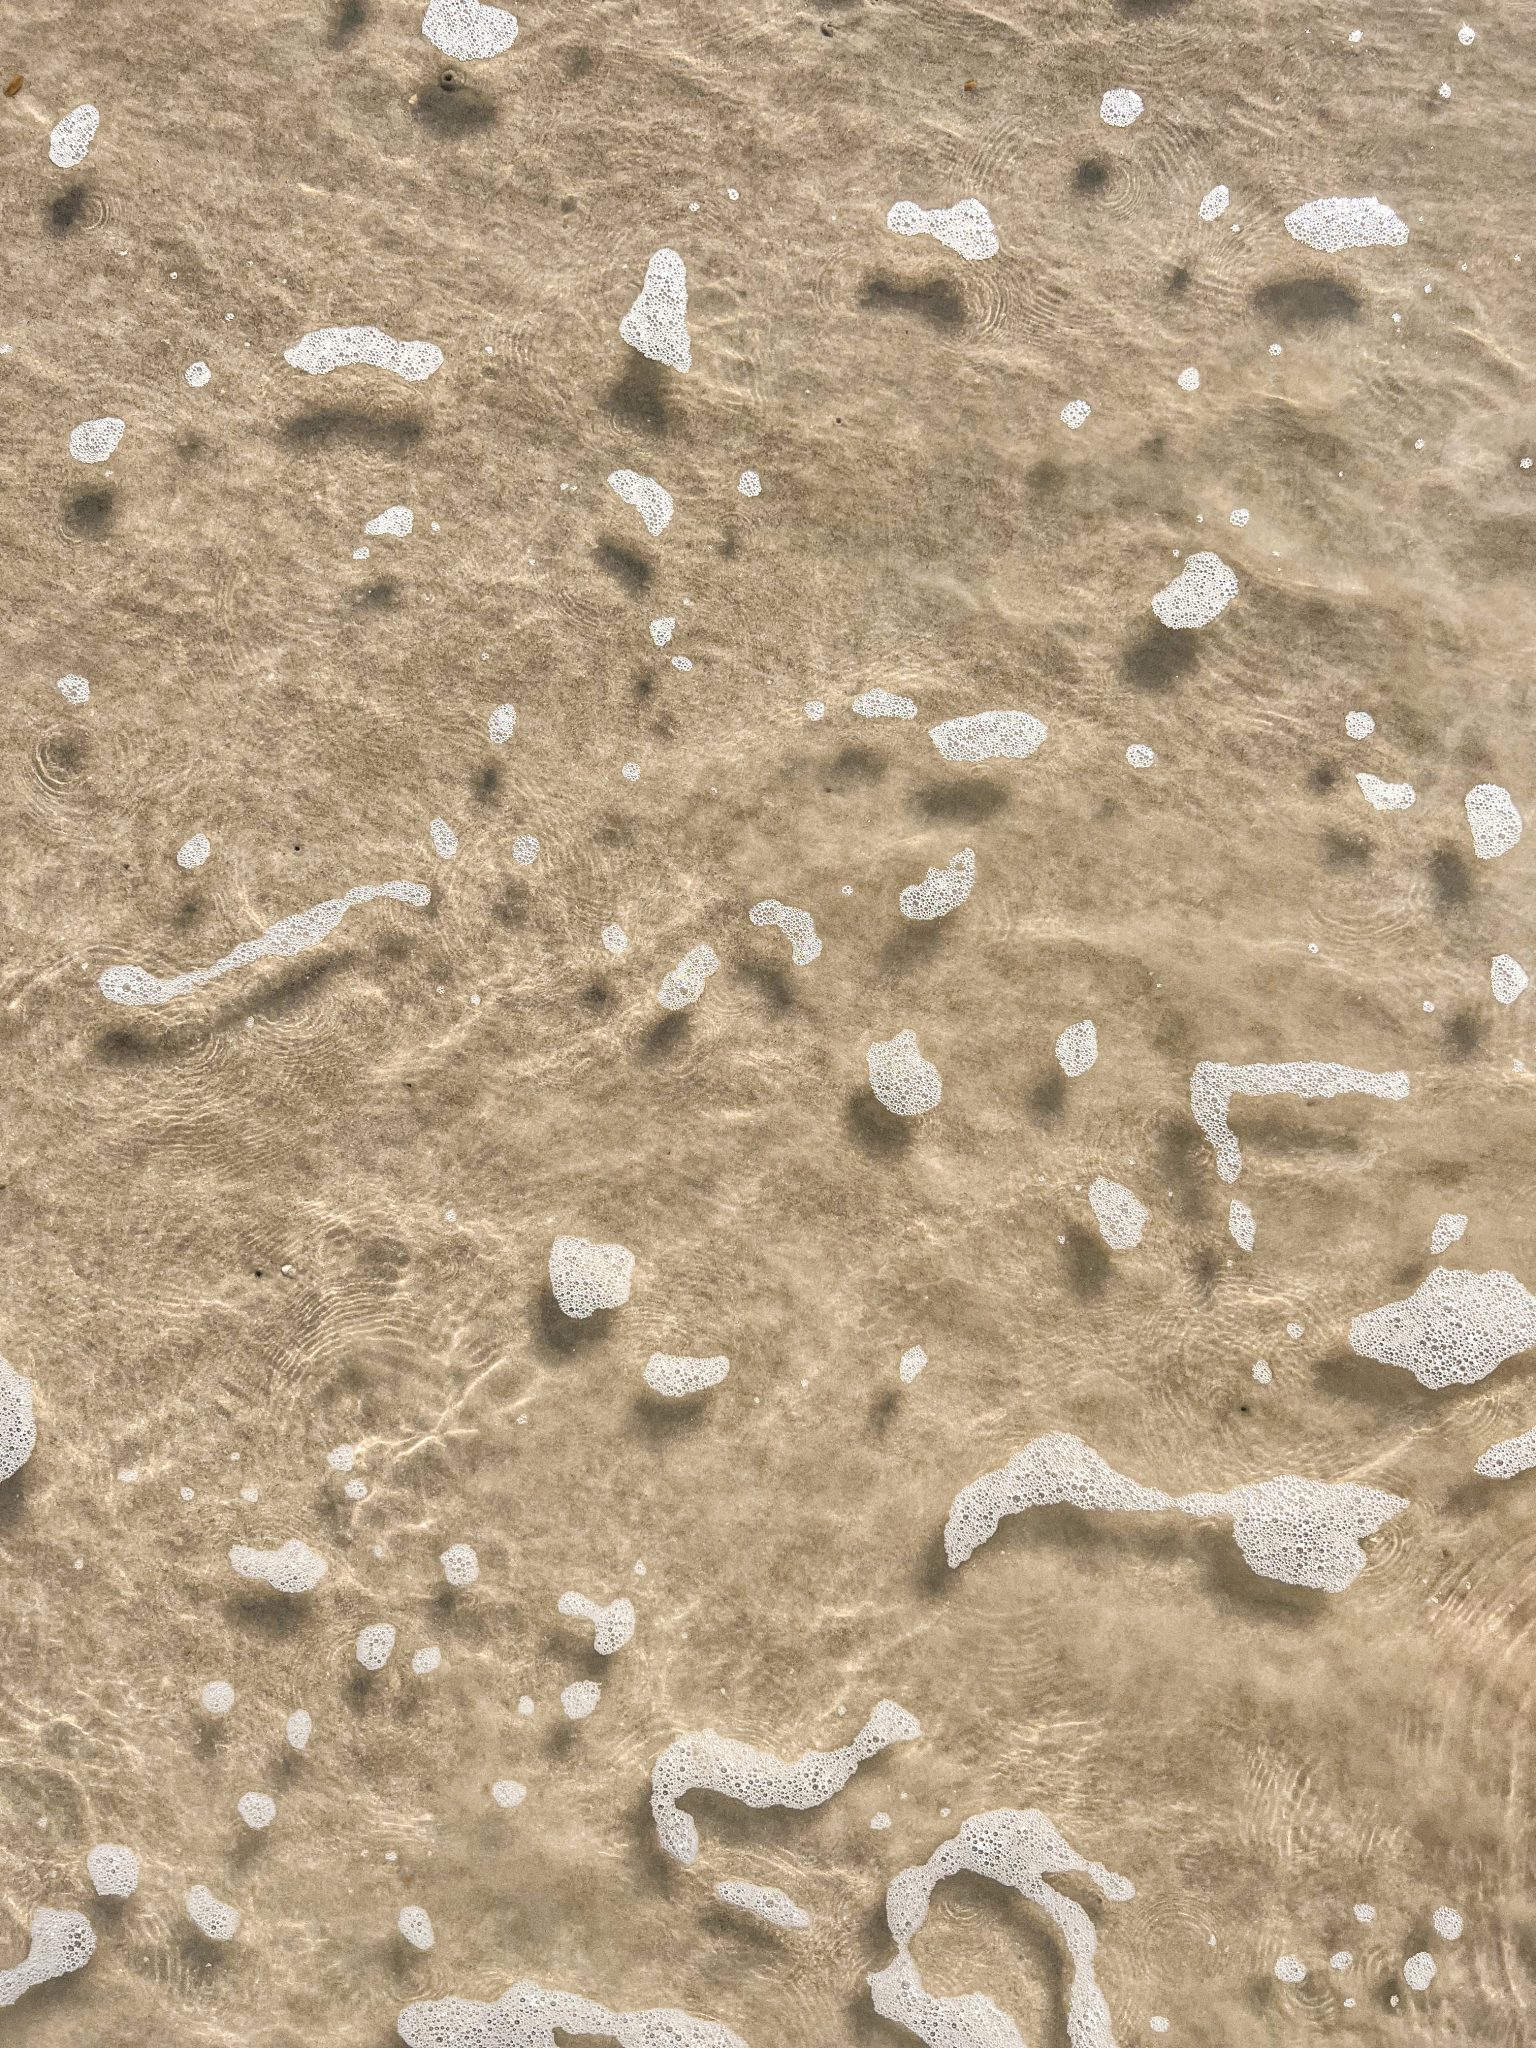 Foam groups from a shallow wave at the beach